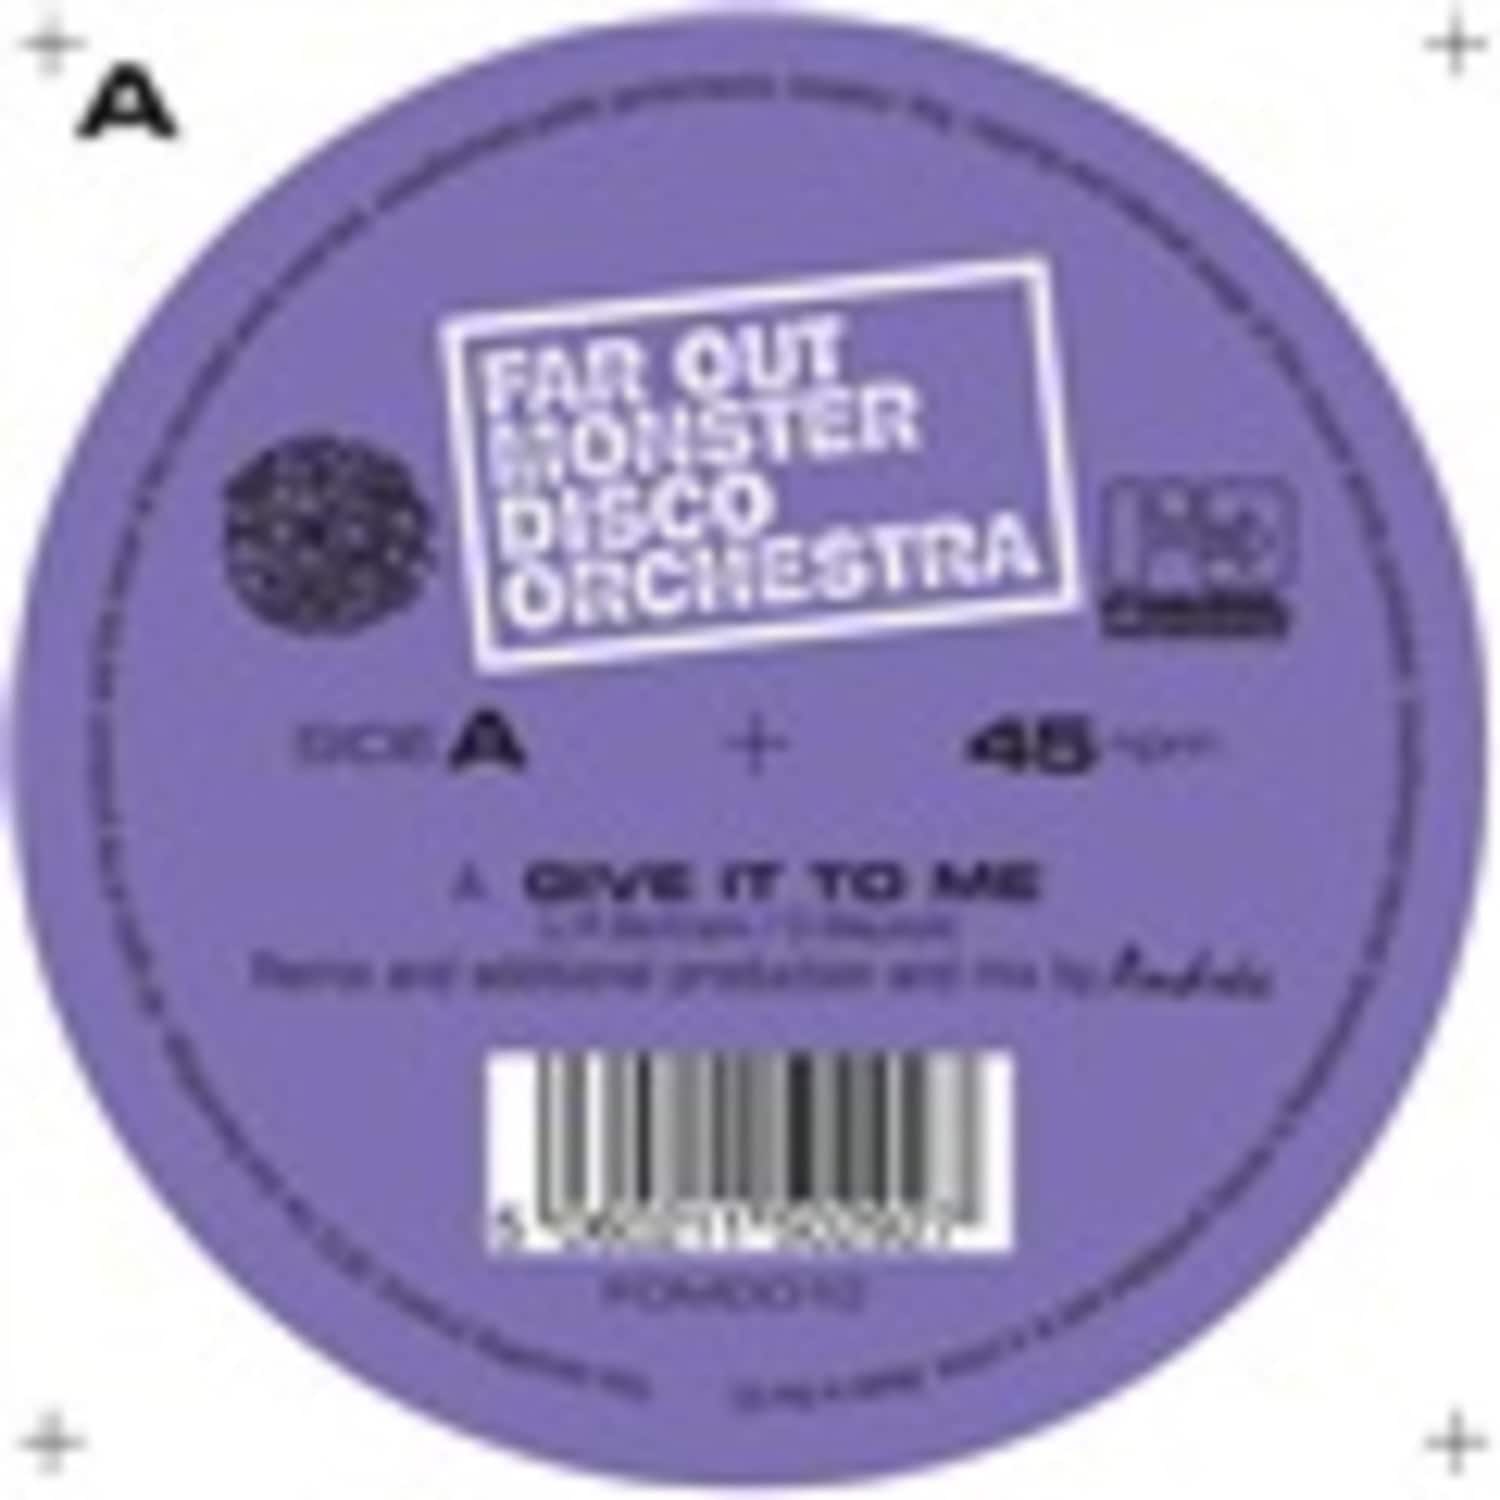 The Far Out Monster Disco Orchestra - GIVE IT TO ME 